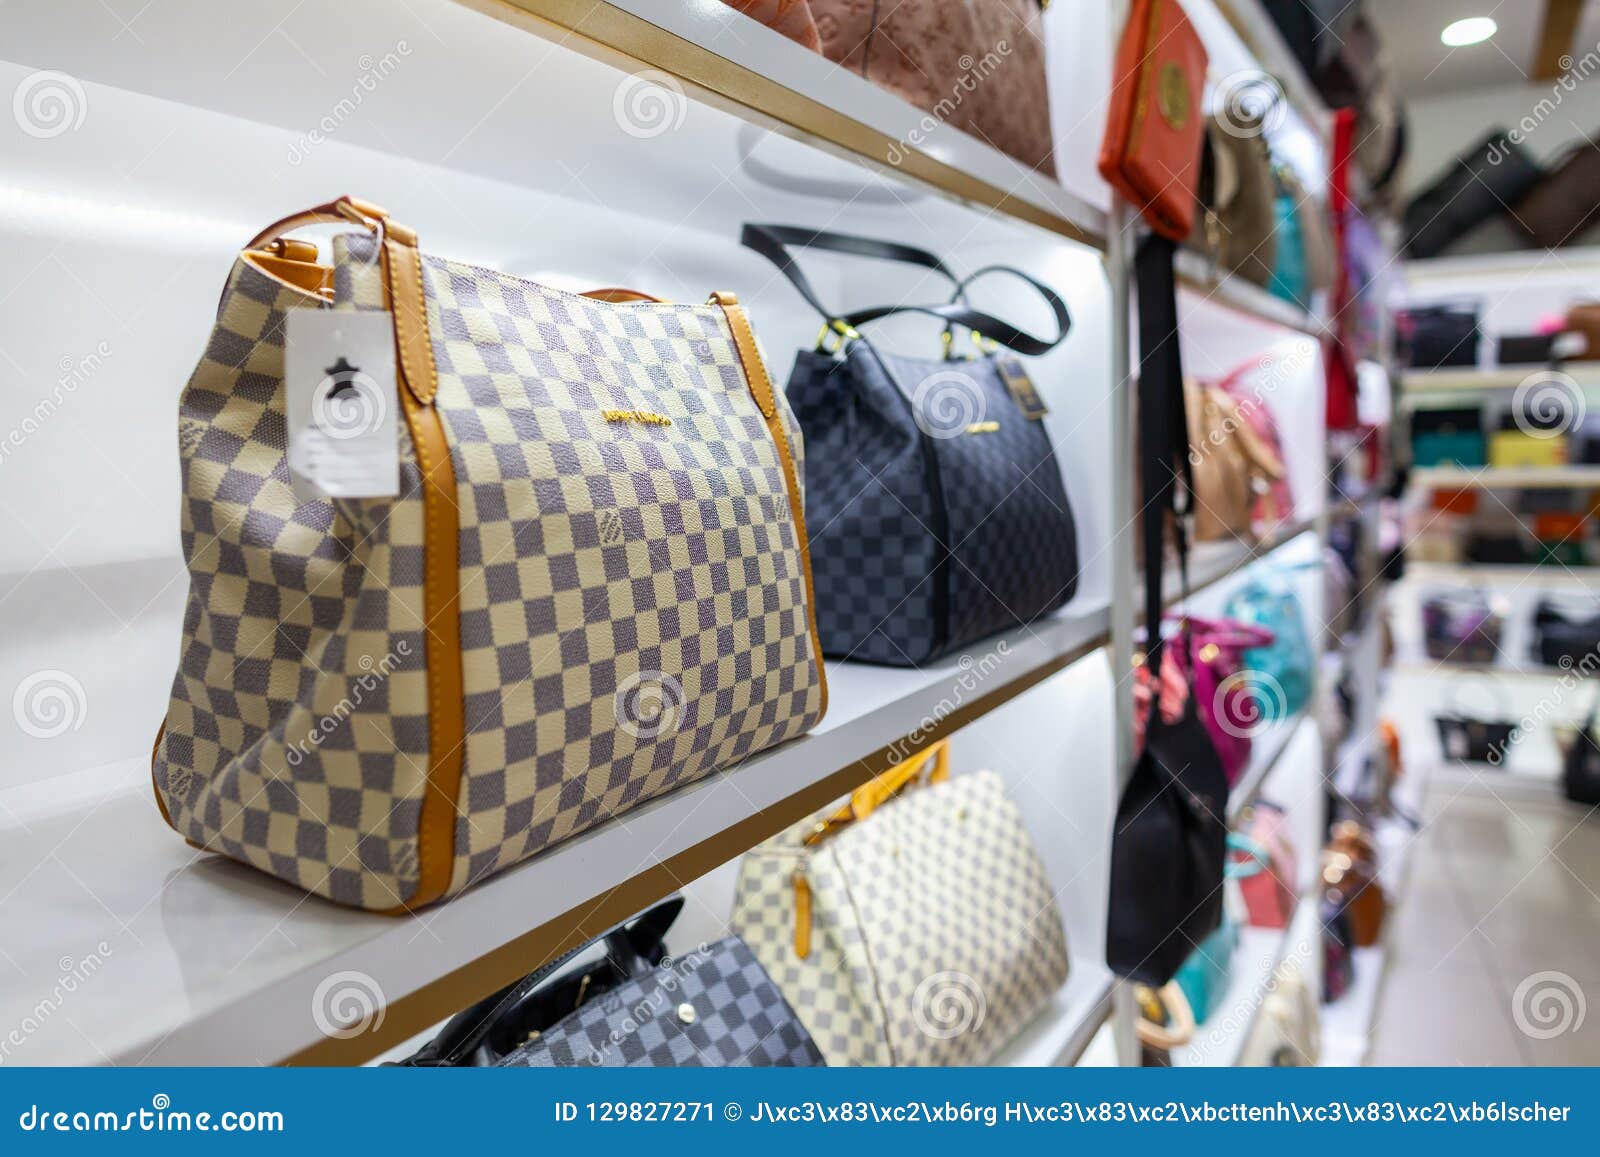 Louis Vuitton Handbags Stans in a Shop Editorial Photo - Image of french,  interior: 129827271